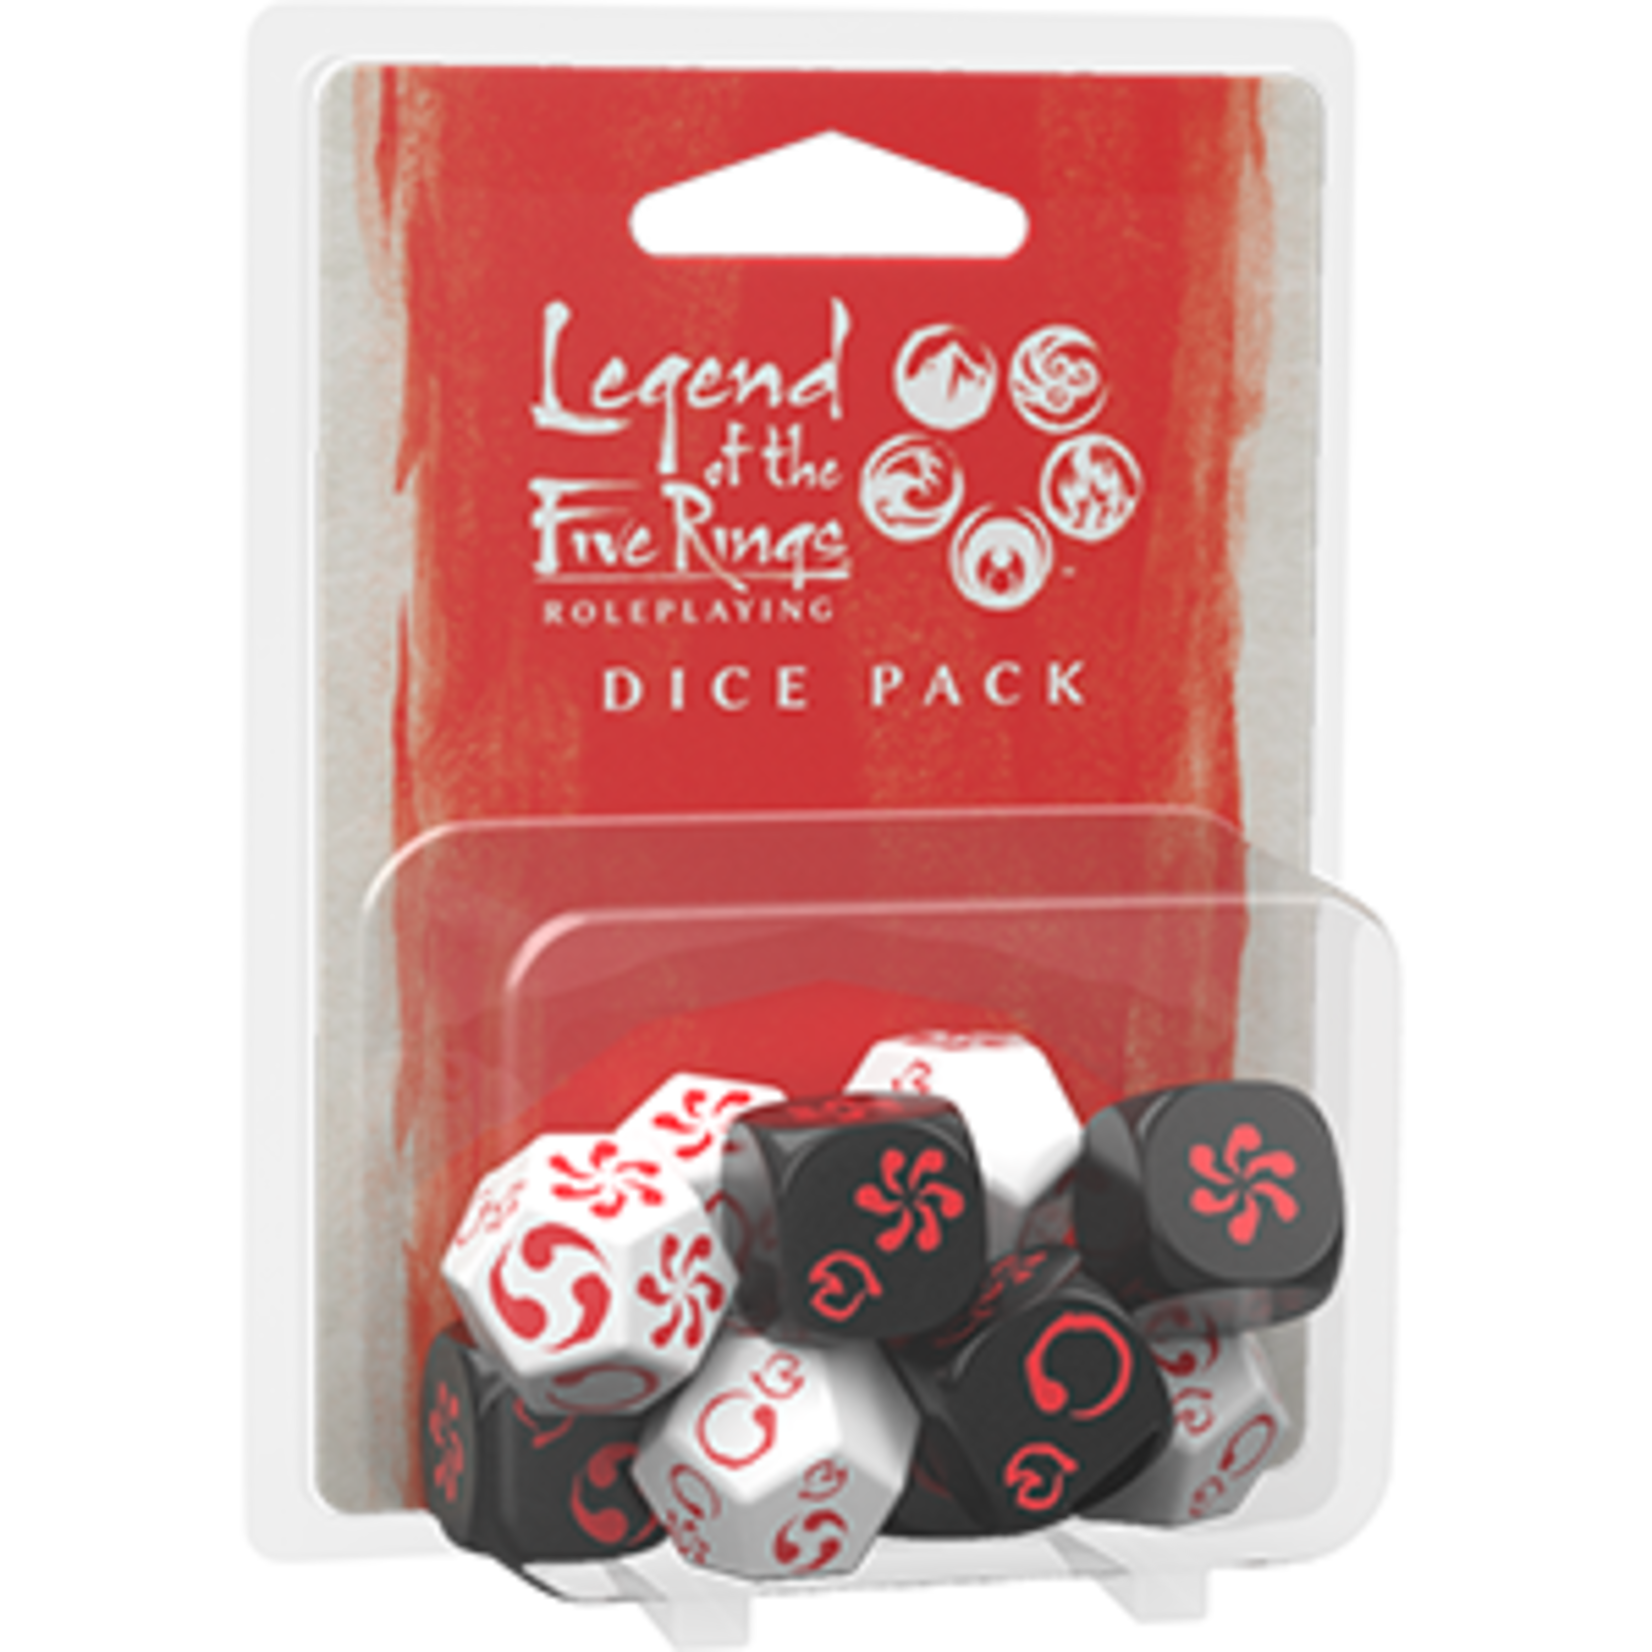 Fantasy Flight Games Legend of the Five Rings L5R Roleplaying Dice Pack